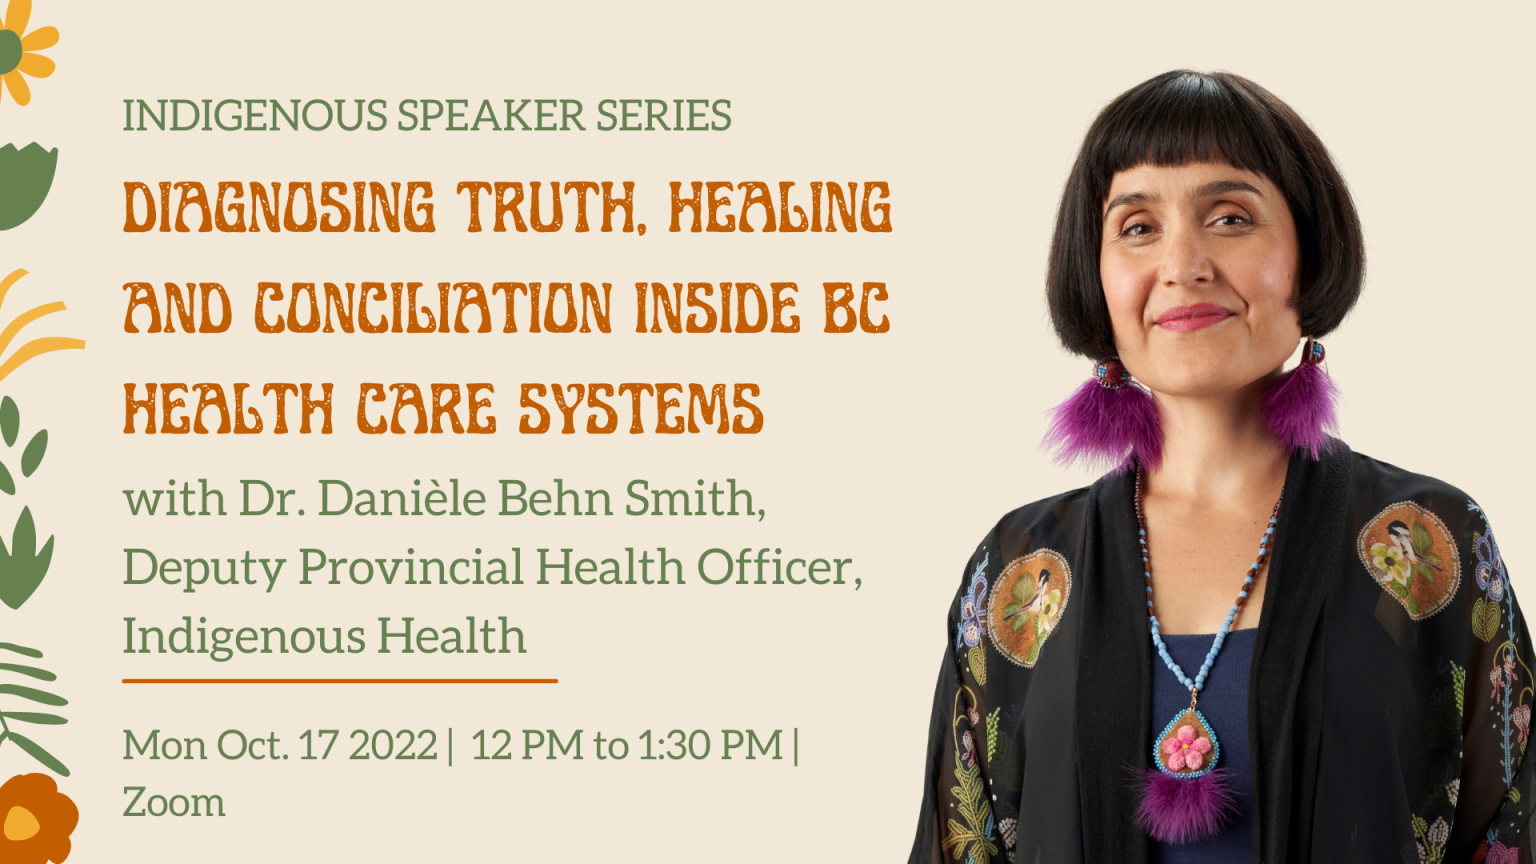 Join us for the Indigenous Speaker Series: Diagnosing Truth, Healing and Conciliation Inside BC Health Care Systems